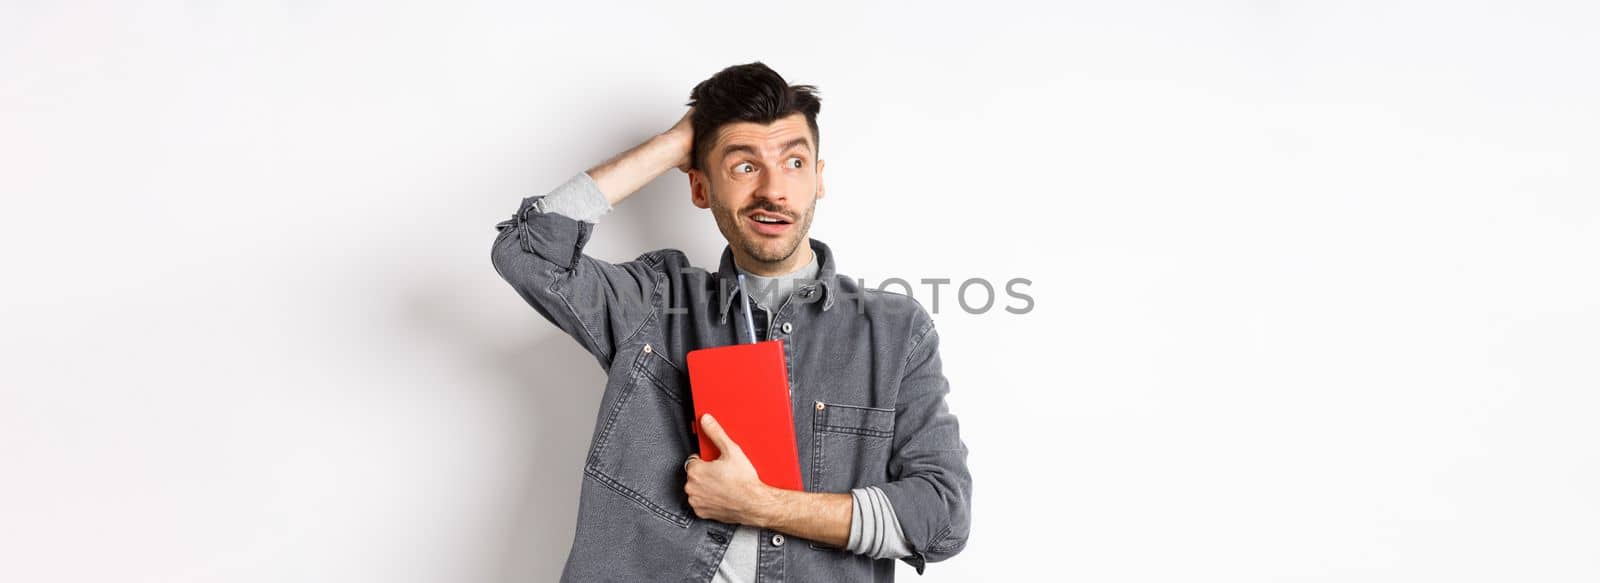 Confused guy scratch head and look aside at logo puzzled, holding red diary or planner, standing against white background.